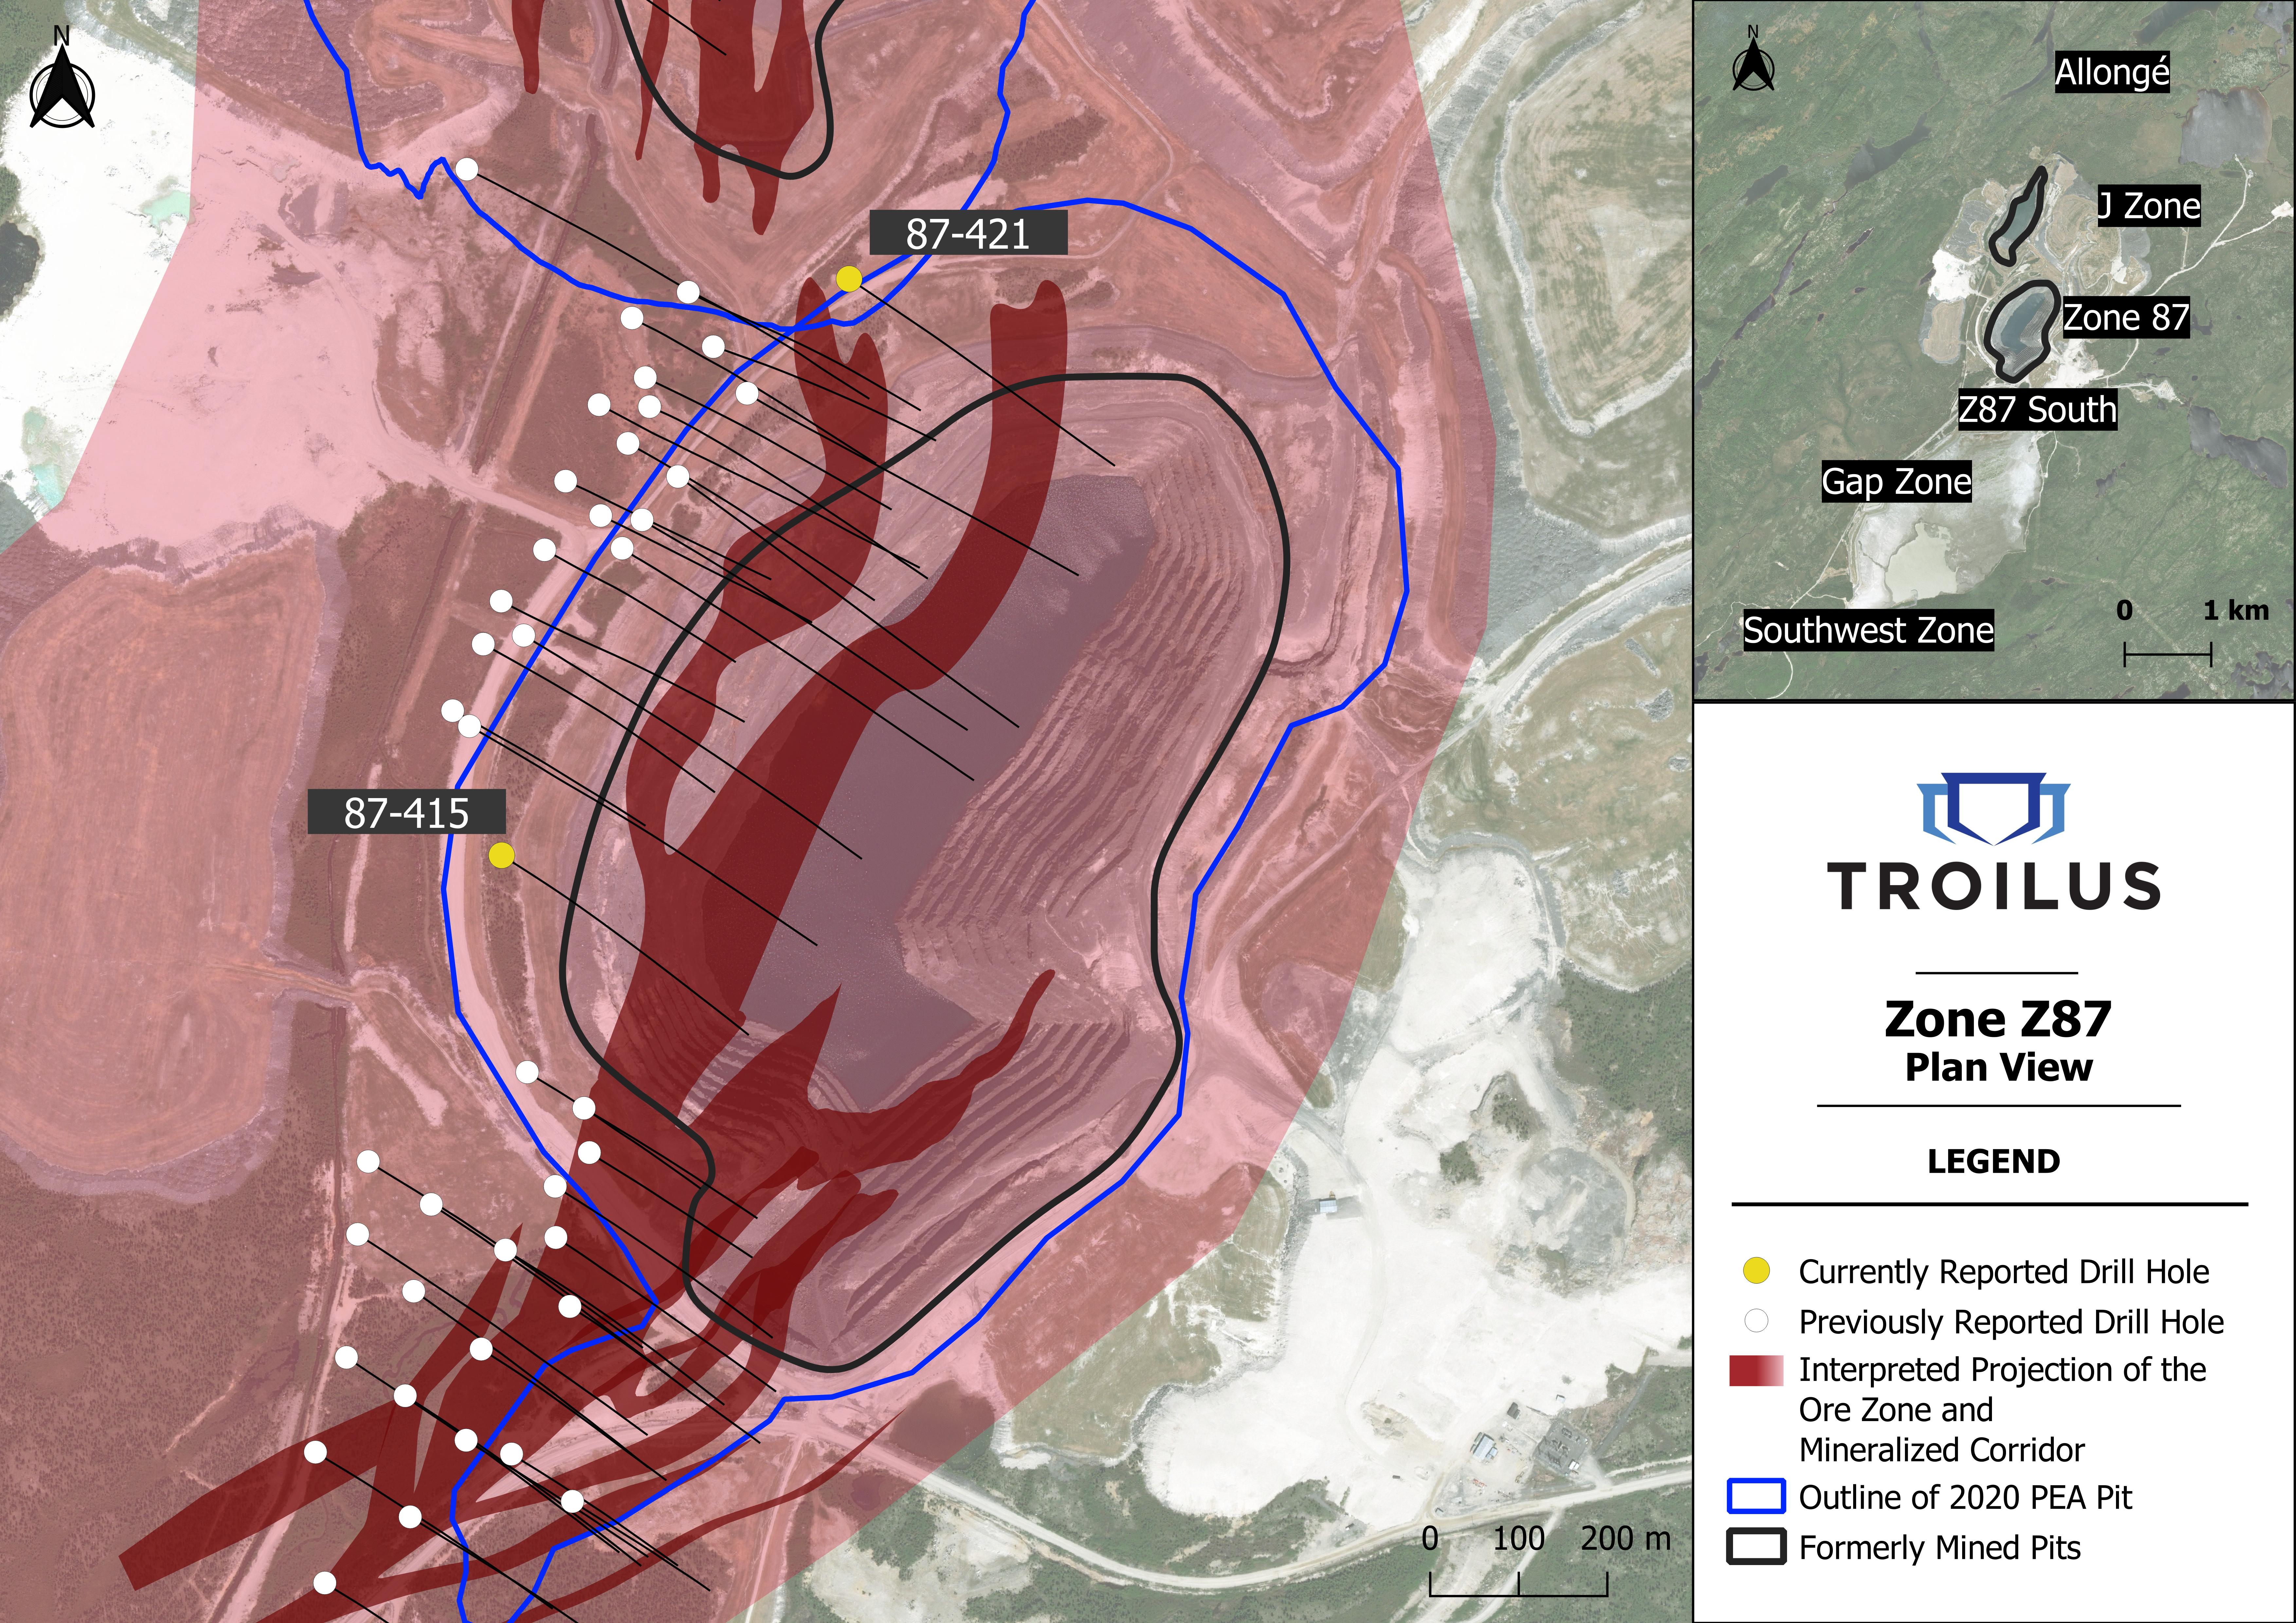 Figure 1.Plan View Map of the Zone Z87, Showing Current and Previously Reported Drill Hole Collars and Traces.